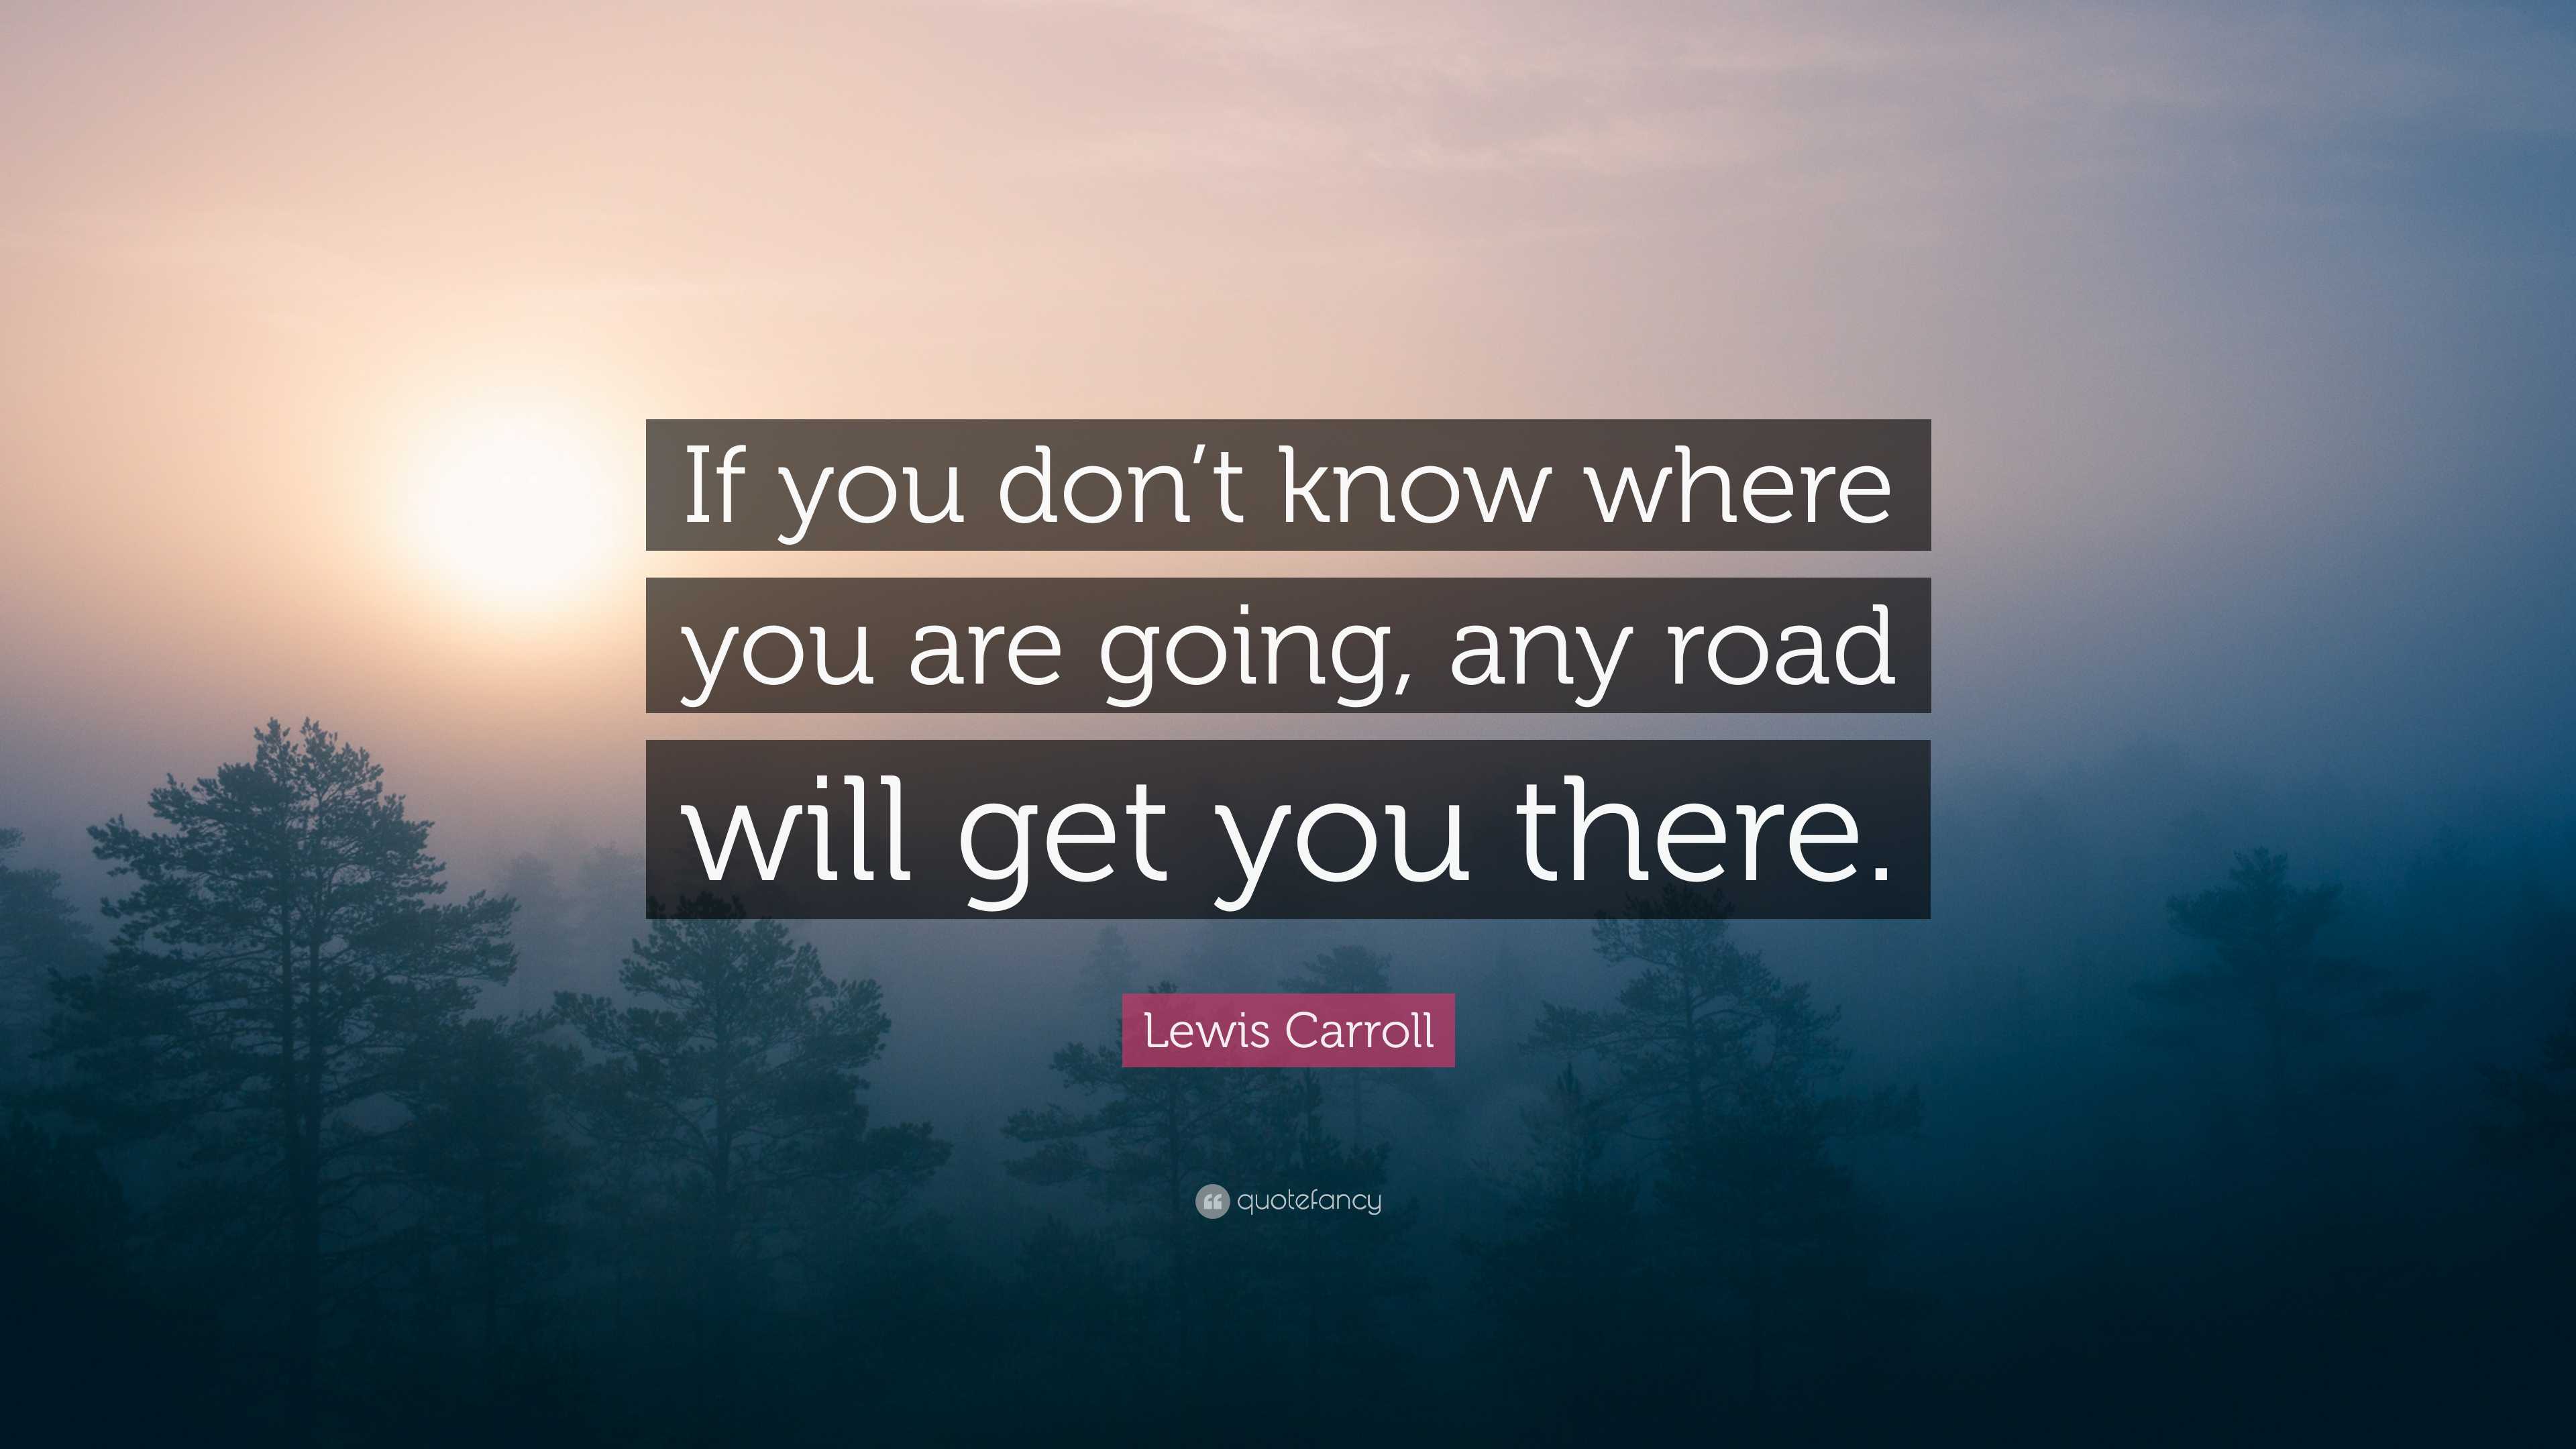 Lewis Carroll - If you don't know where you are going, any